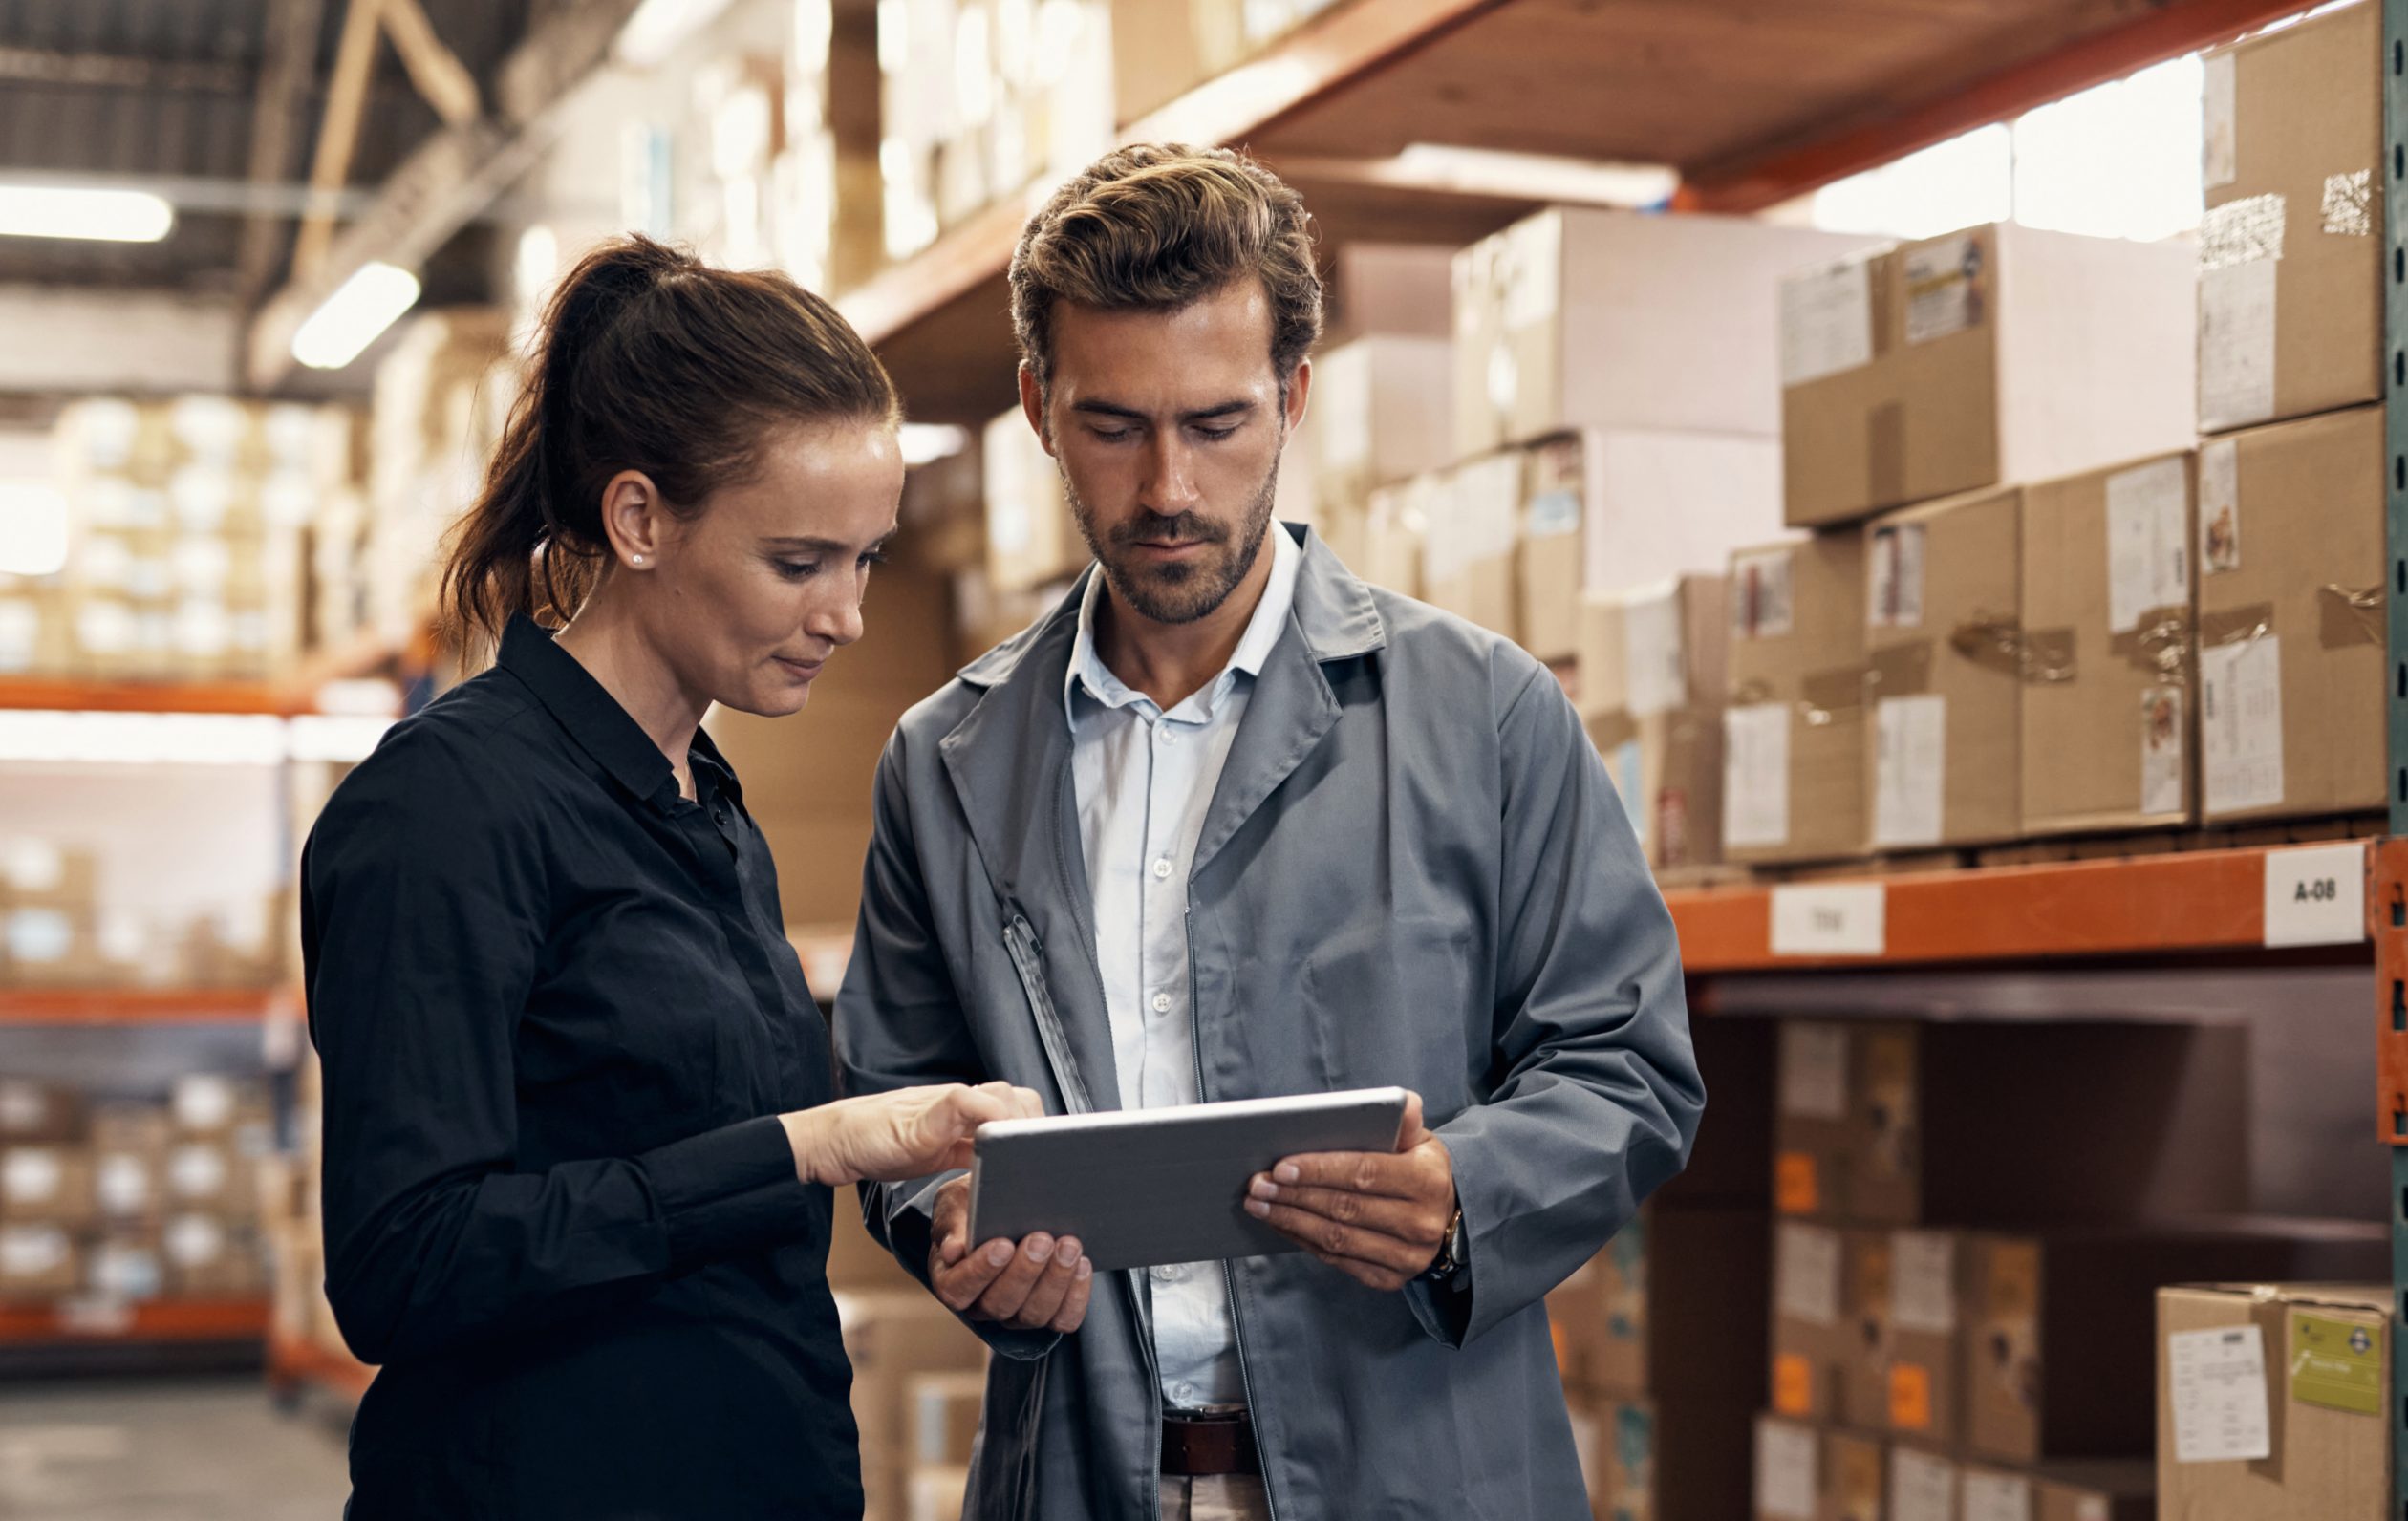 Photograph of two people looking at a tablet while standing in front of warehouse shelves filled with boxes